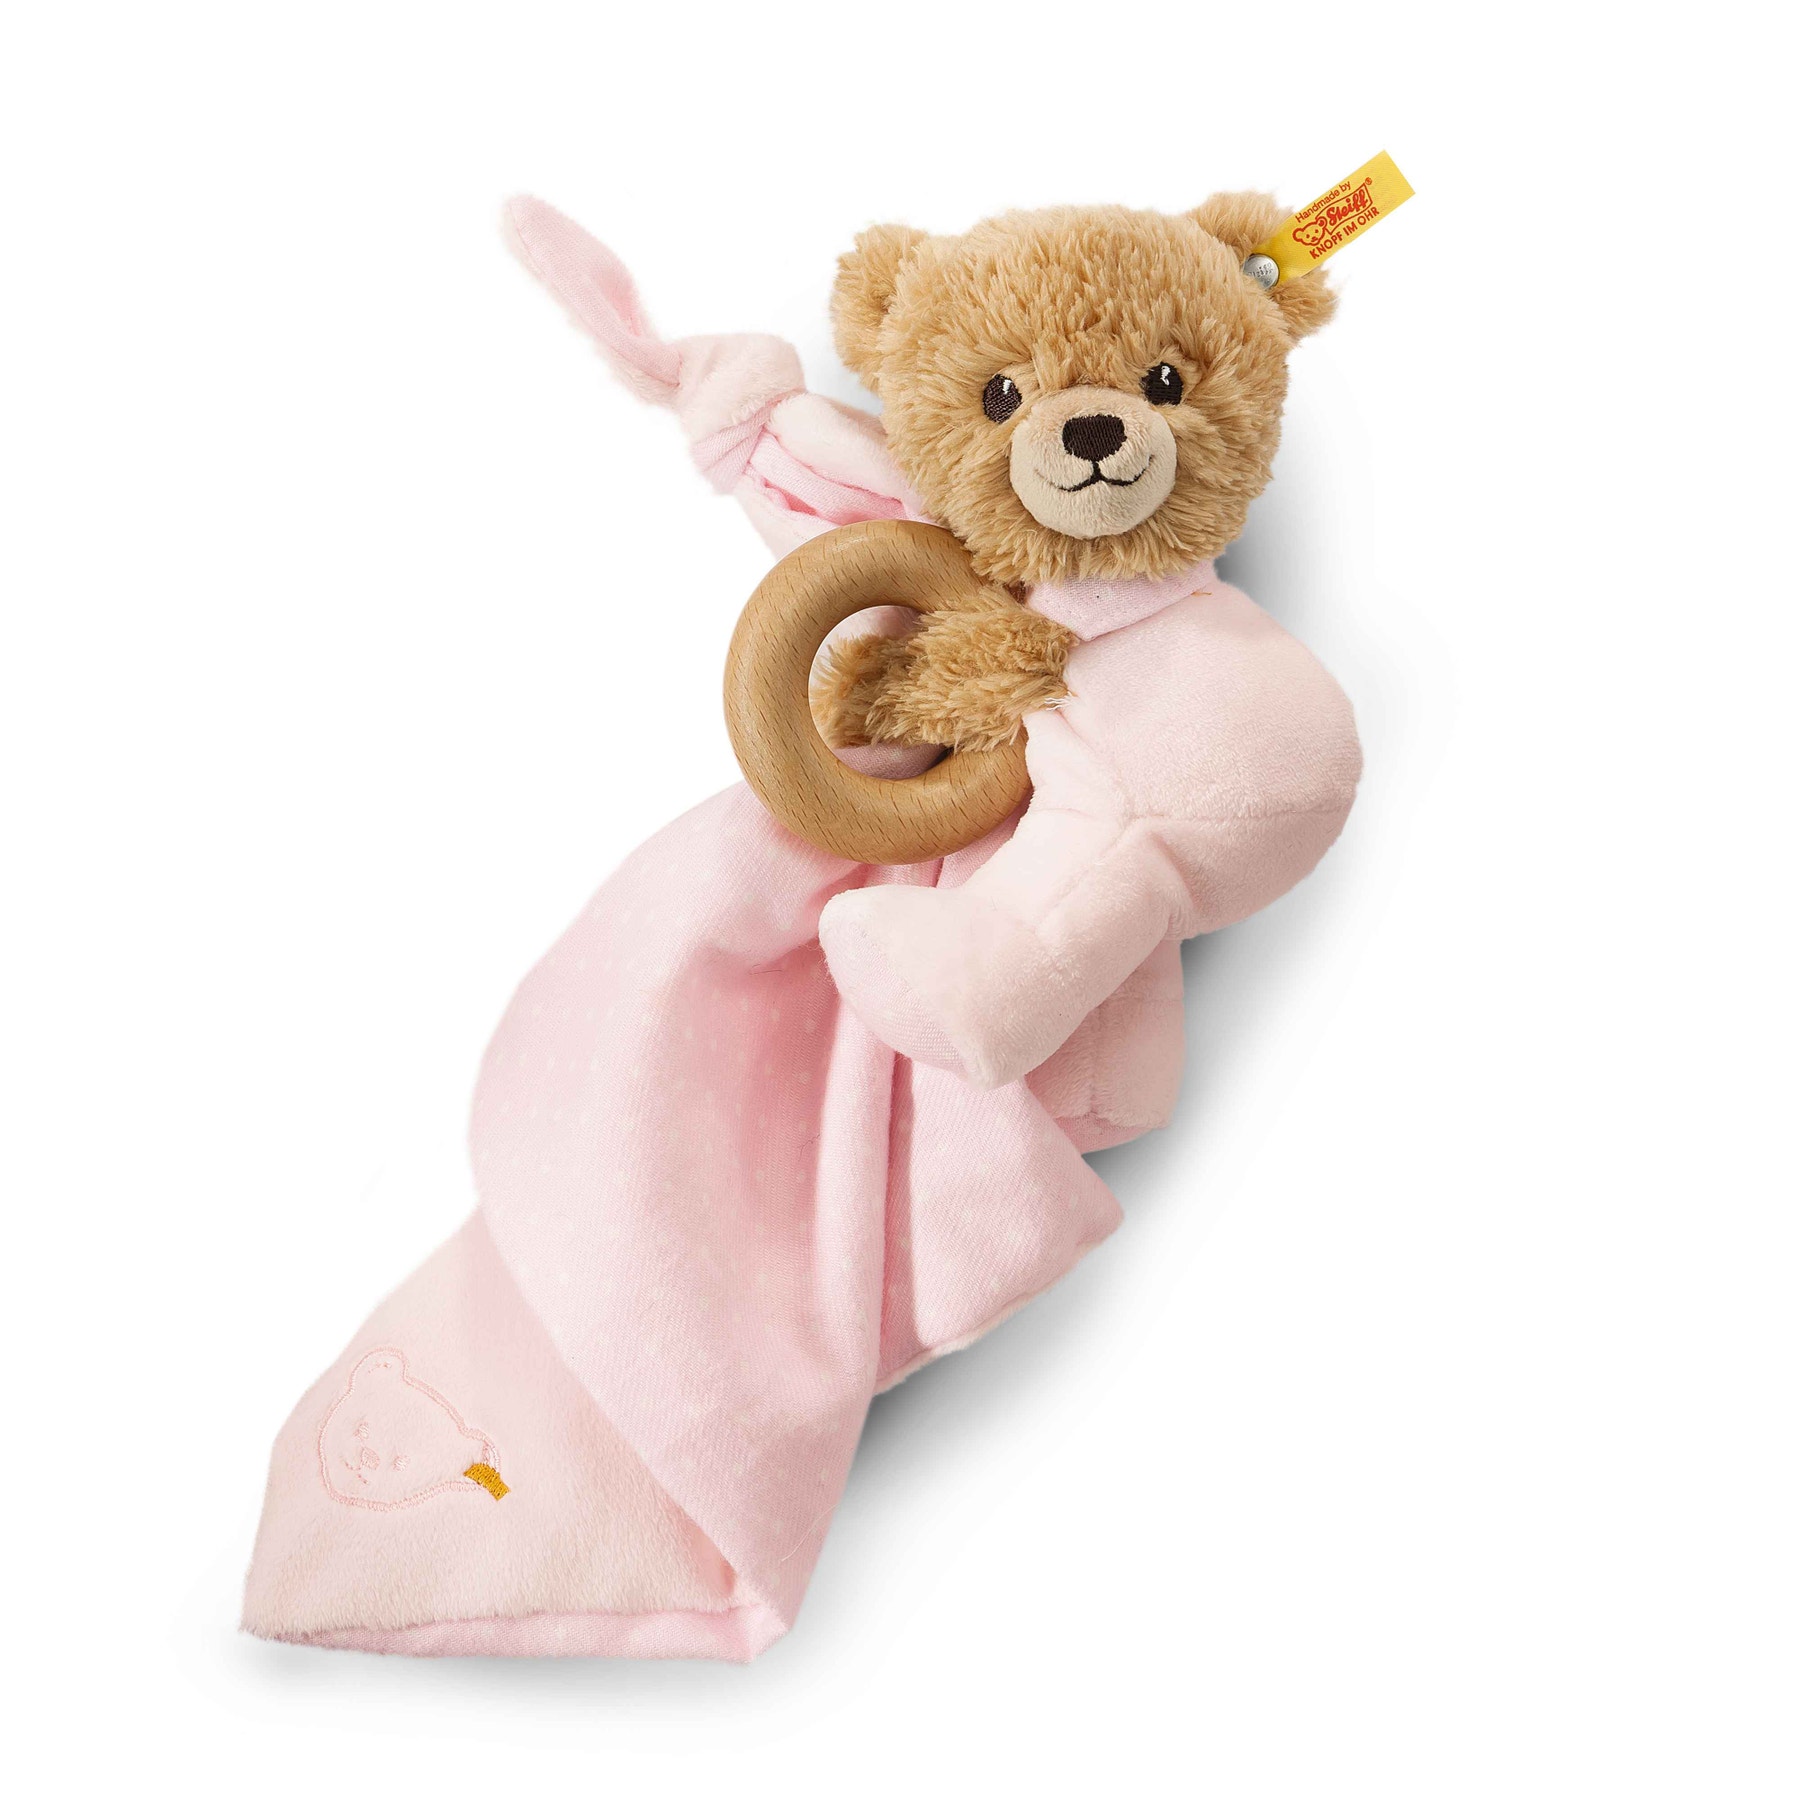 Sleep well bear 3-in-1 with rattle